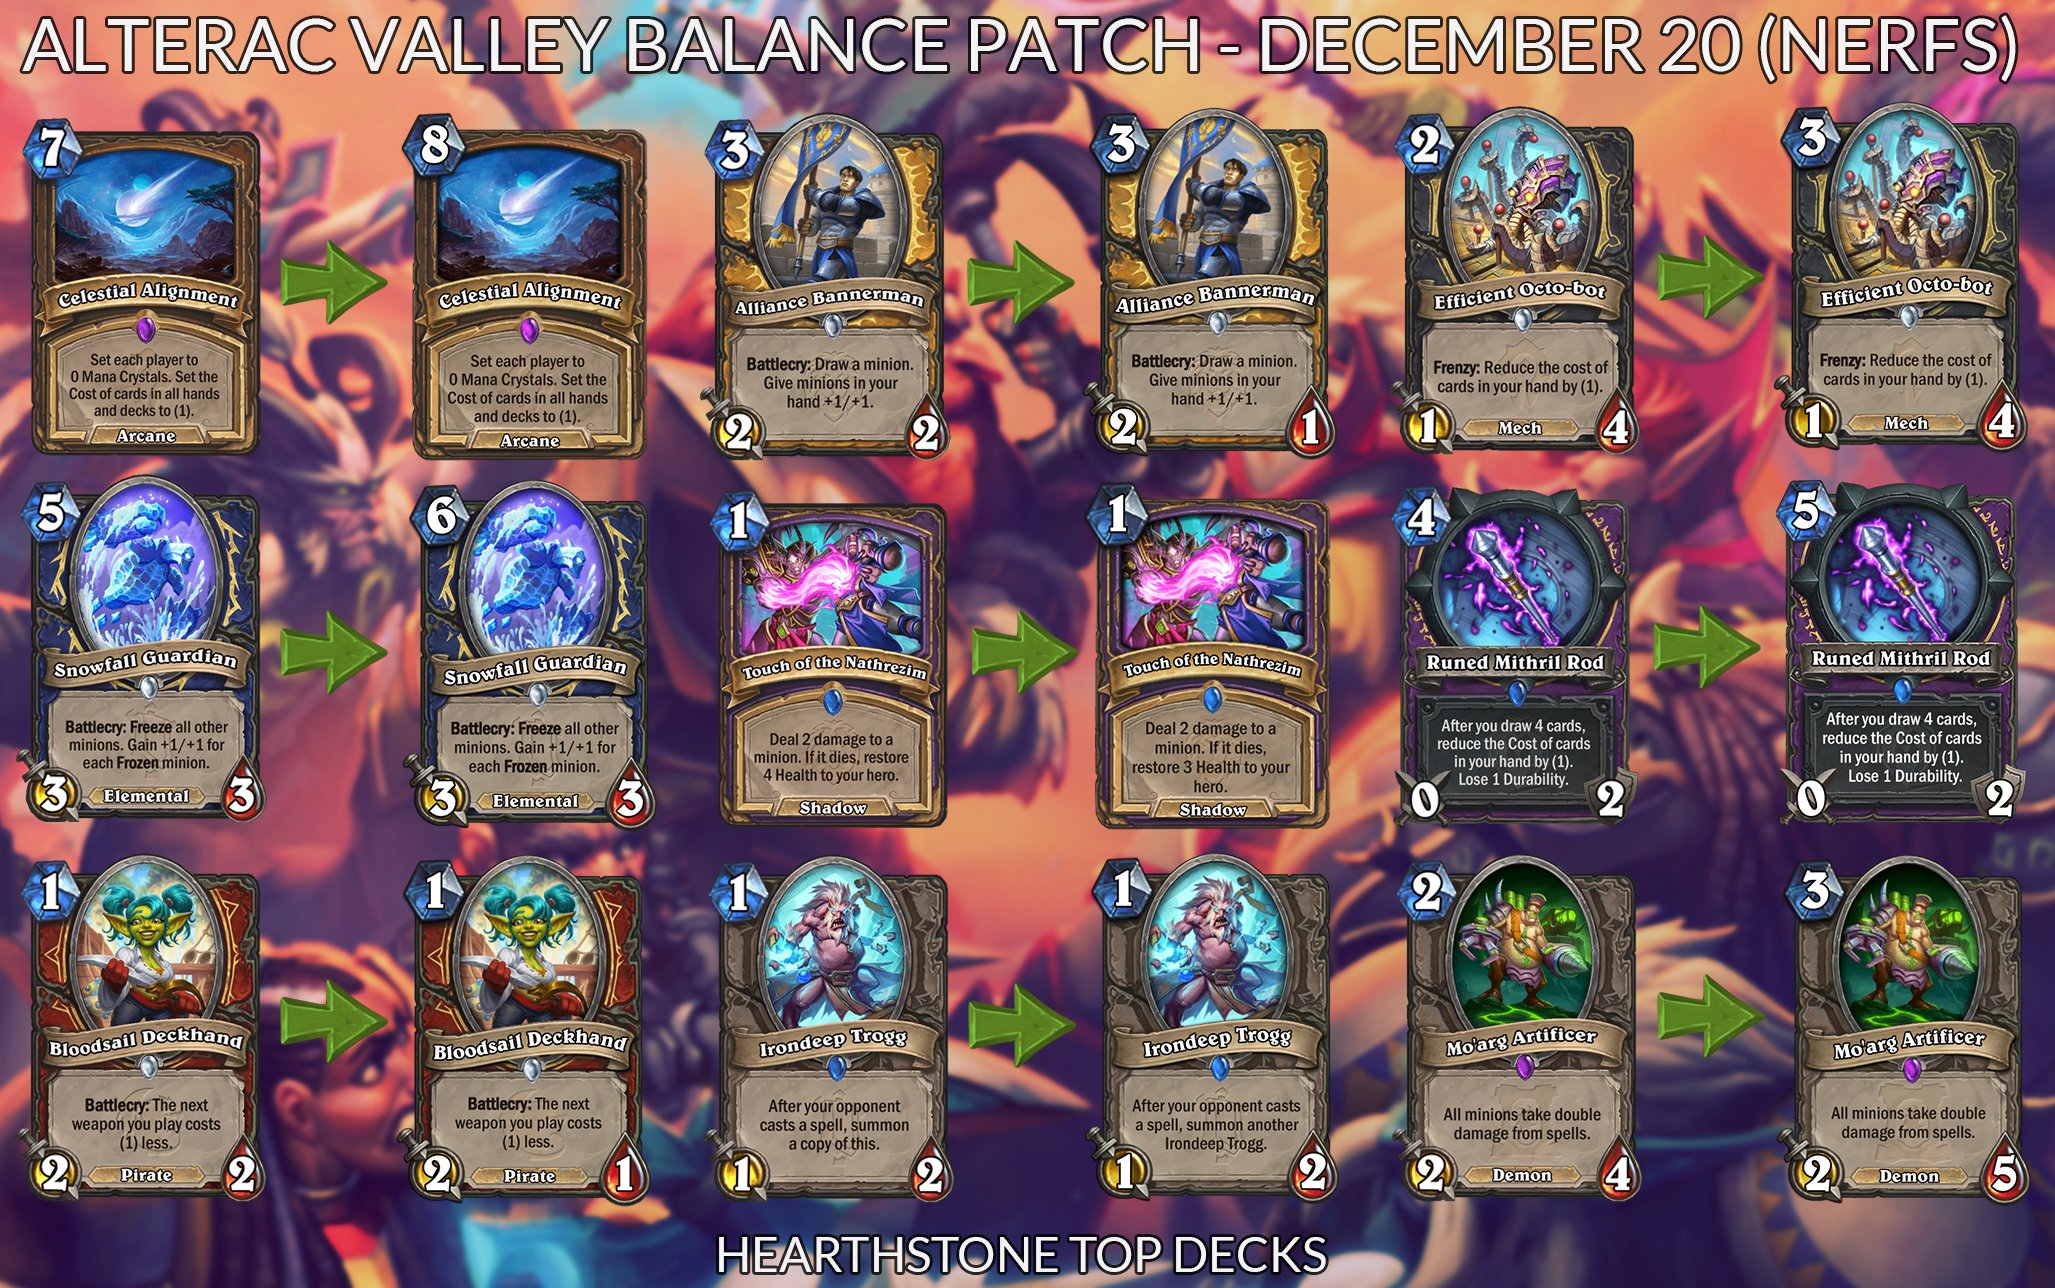 Hearthstone Top Decks💙 on "Balance update is coming IN AN HOUR! 9 Constructed Nerfs (Druid, Paladin, Rogue, Shaman, Warlock, Warrior, Neutral), 5 Buffs (Mage, Hunter) + some balance changes.